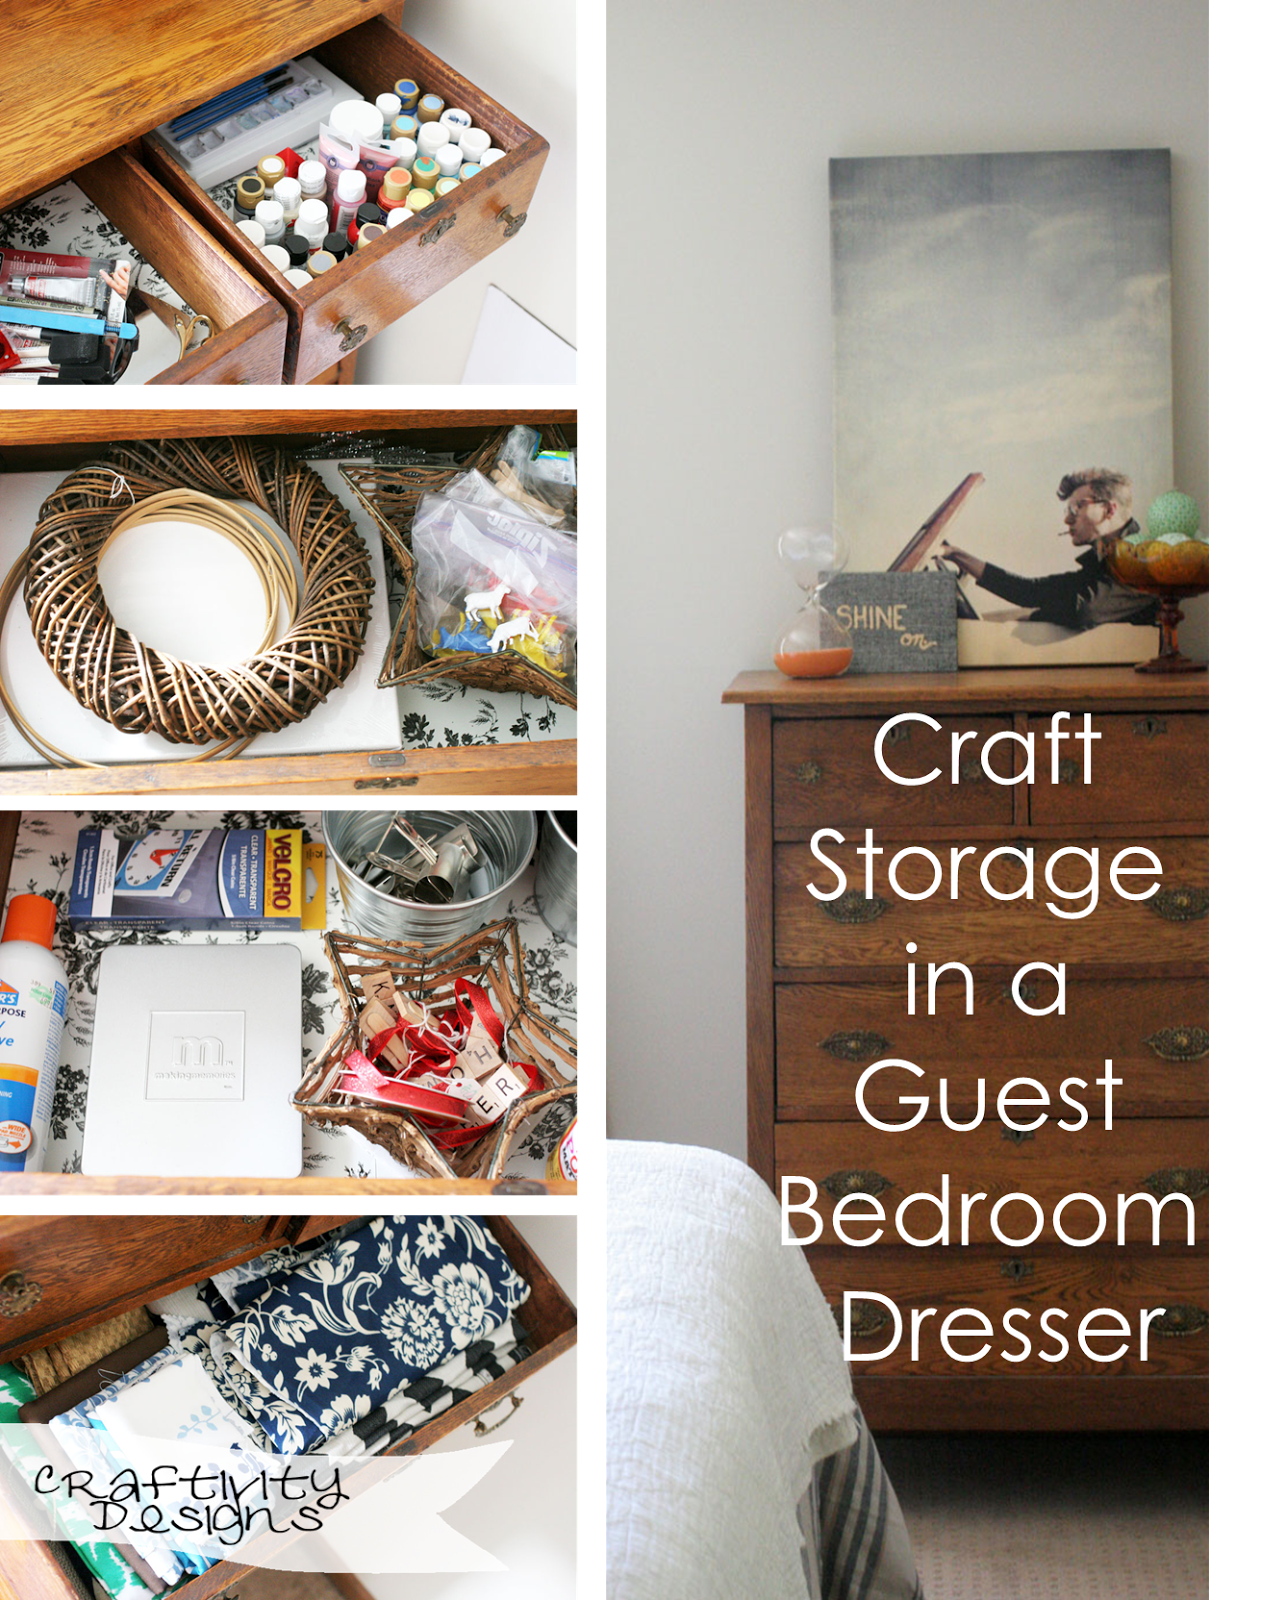 How to Store a Dresser